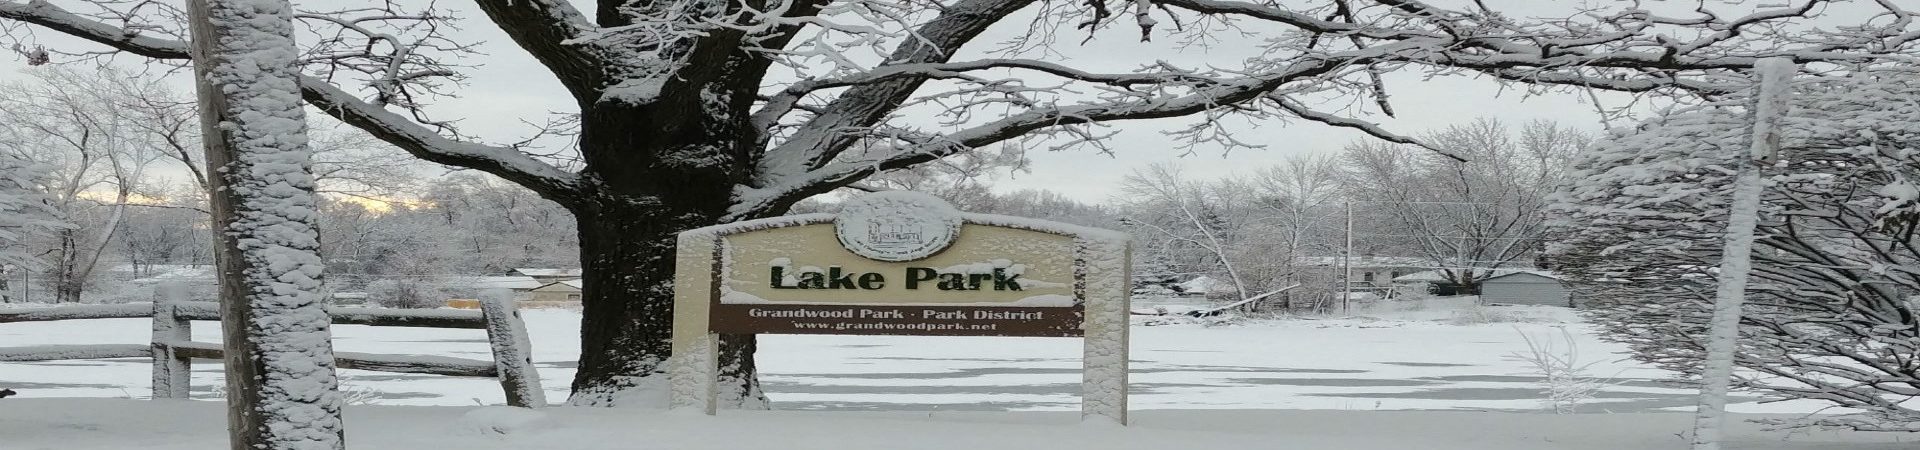 photo of lake park sign with snow